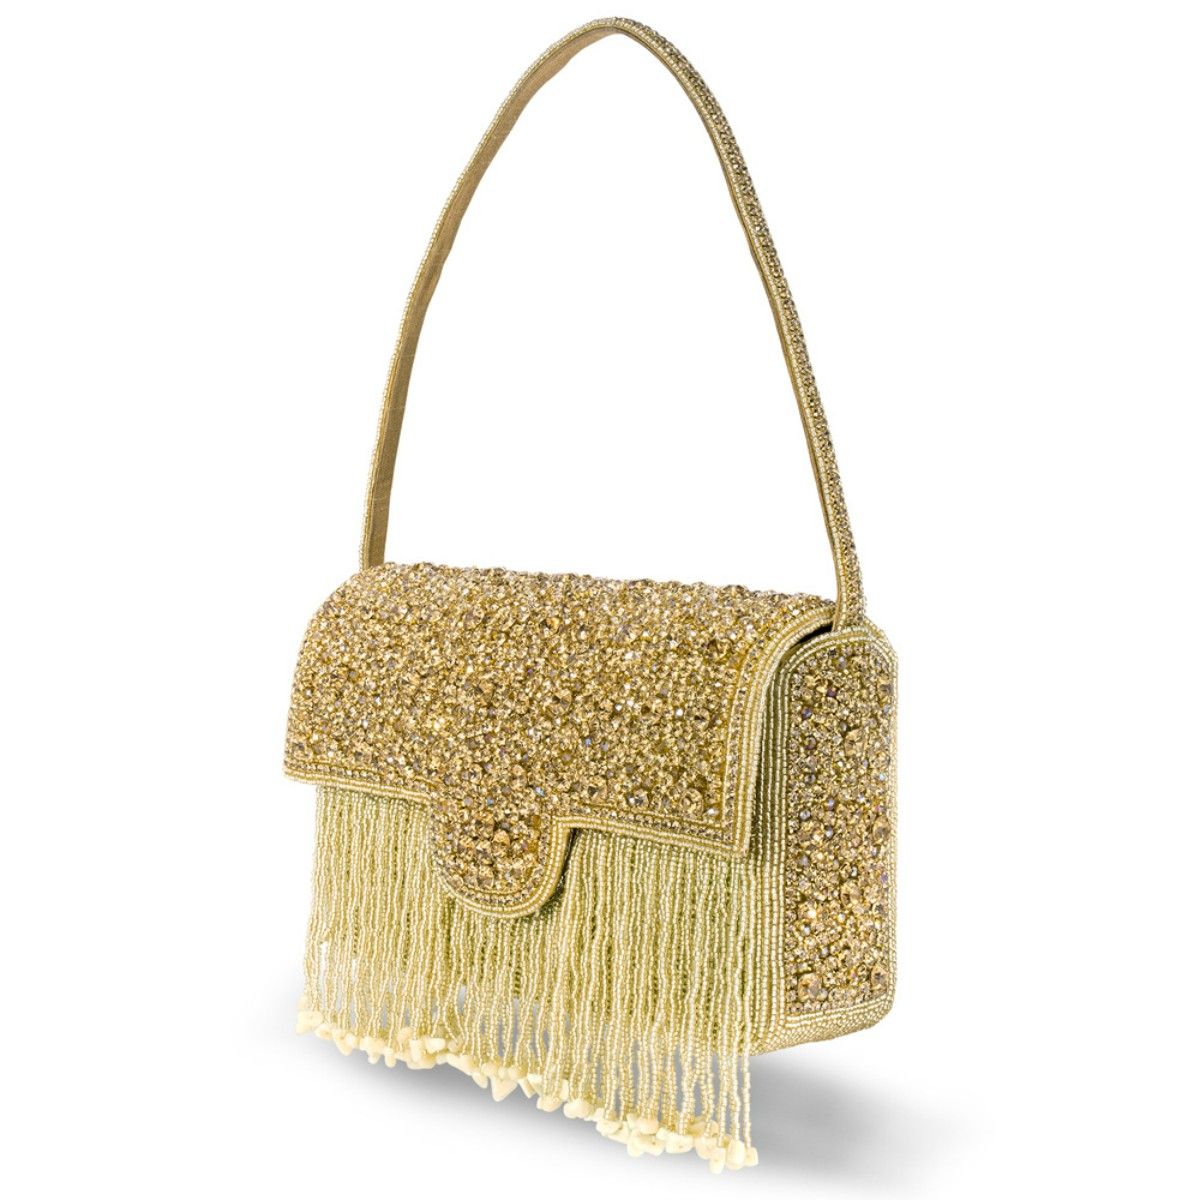 TOOBA Girl's Tassle Clutch (Golden Curve) : Amazon.in: Fashion